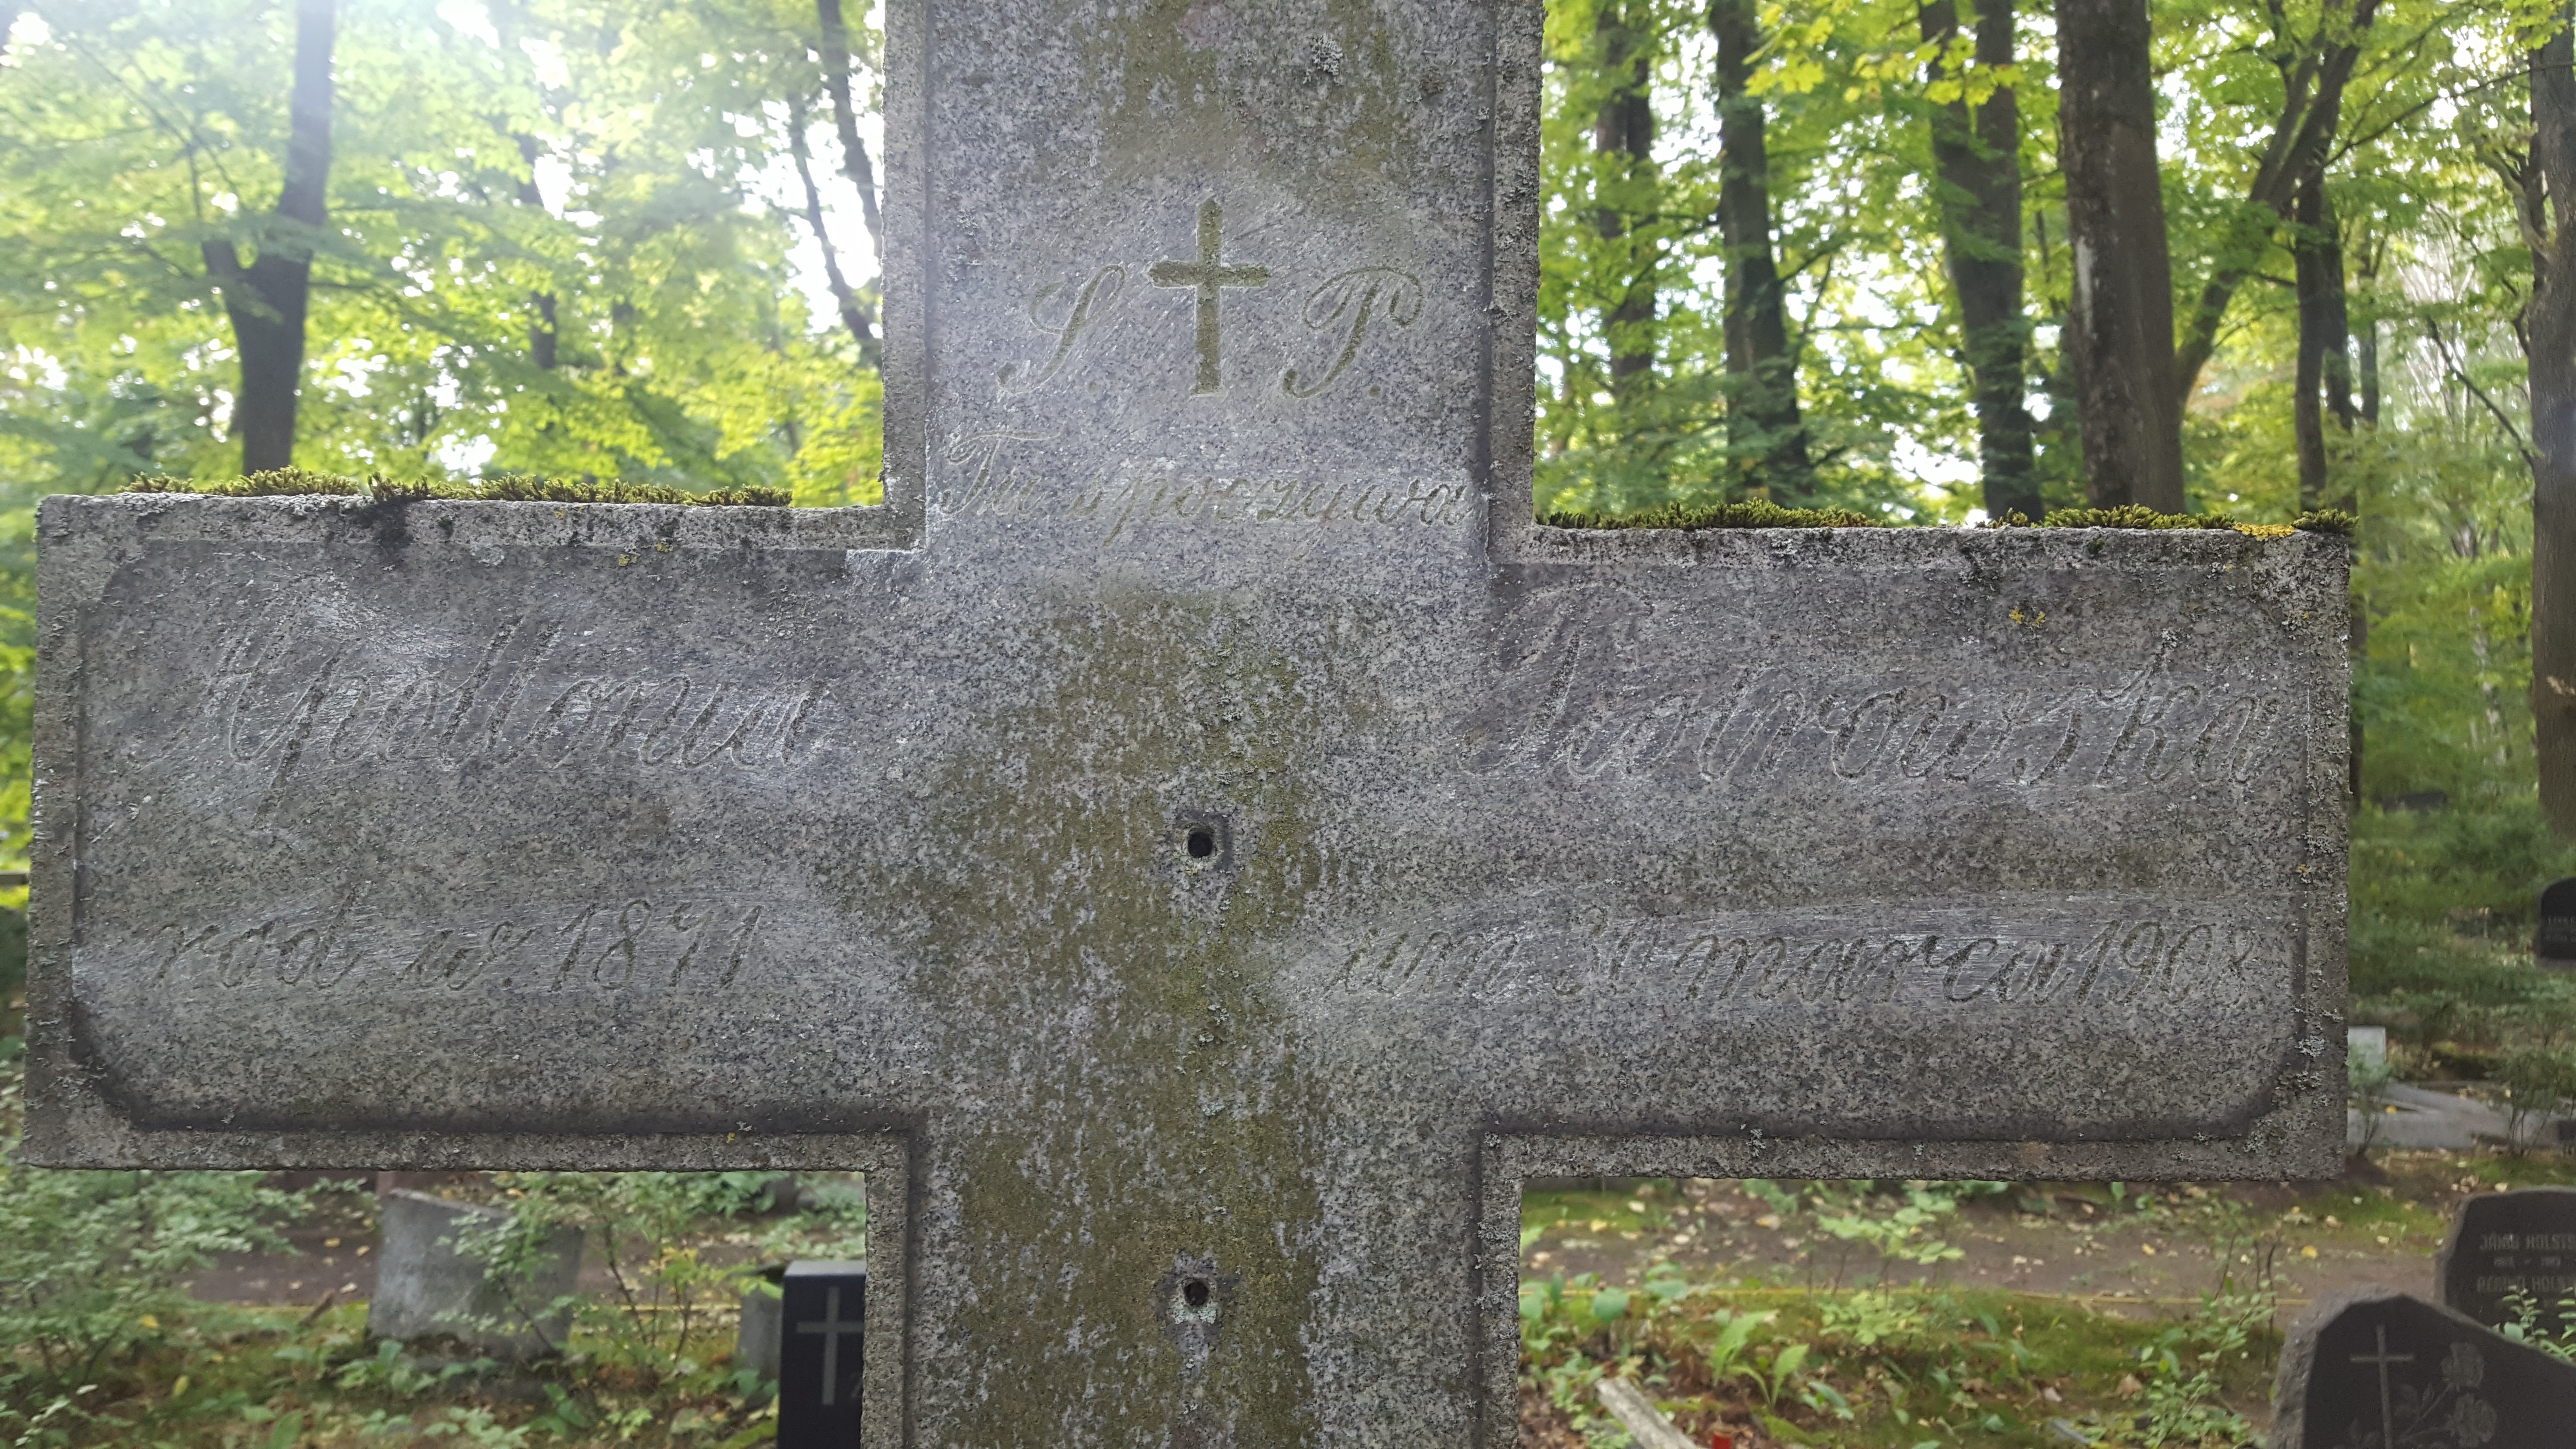 Fragment of the tombstone of Apollonia Piotrowska, St Michael's cemetery in Riga, as of 2021.